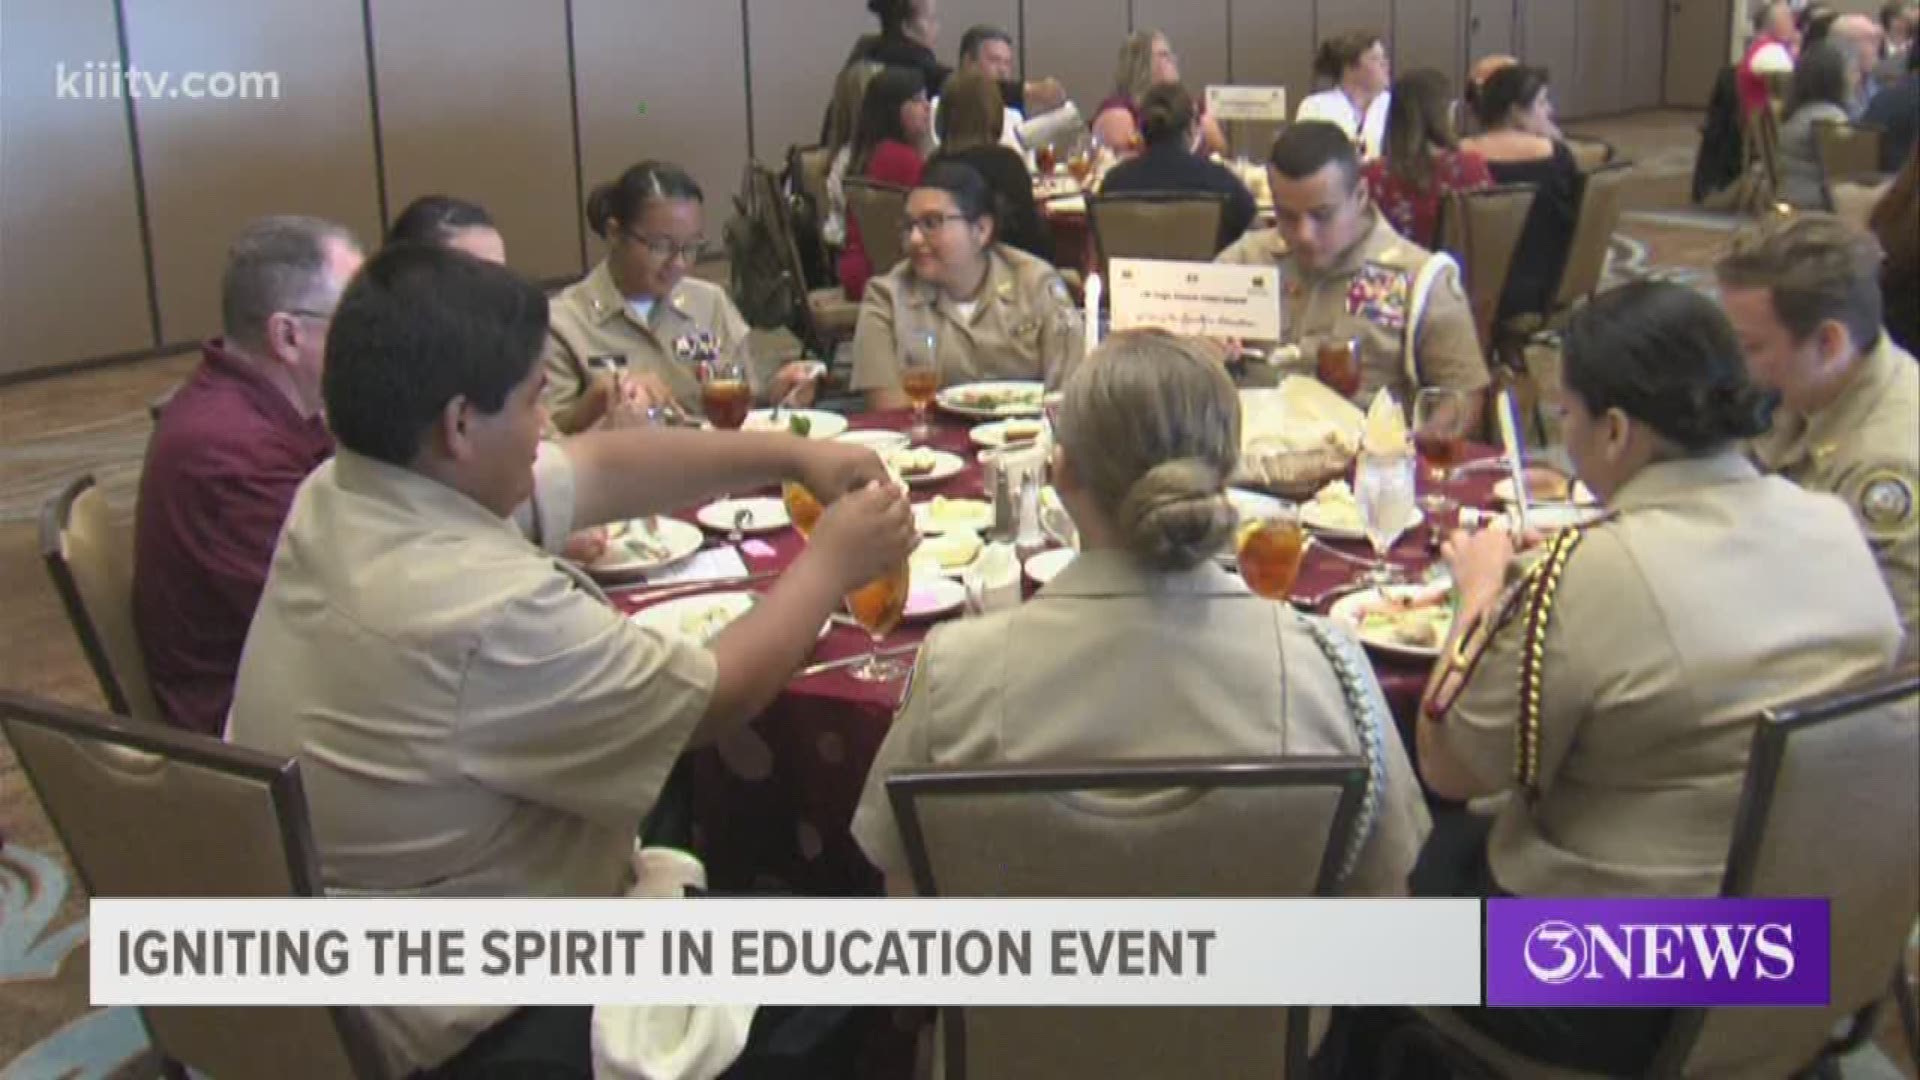 he luncheon was held to give an update on the status of education in front of legislators.